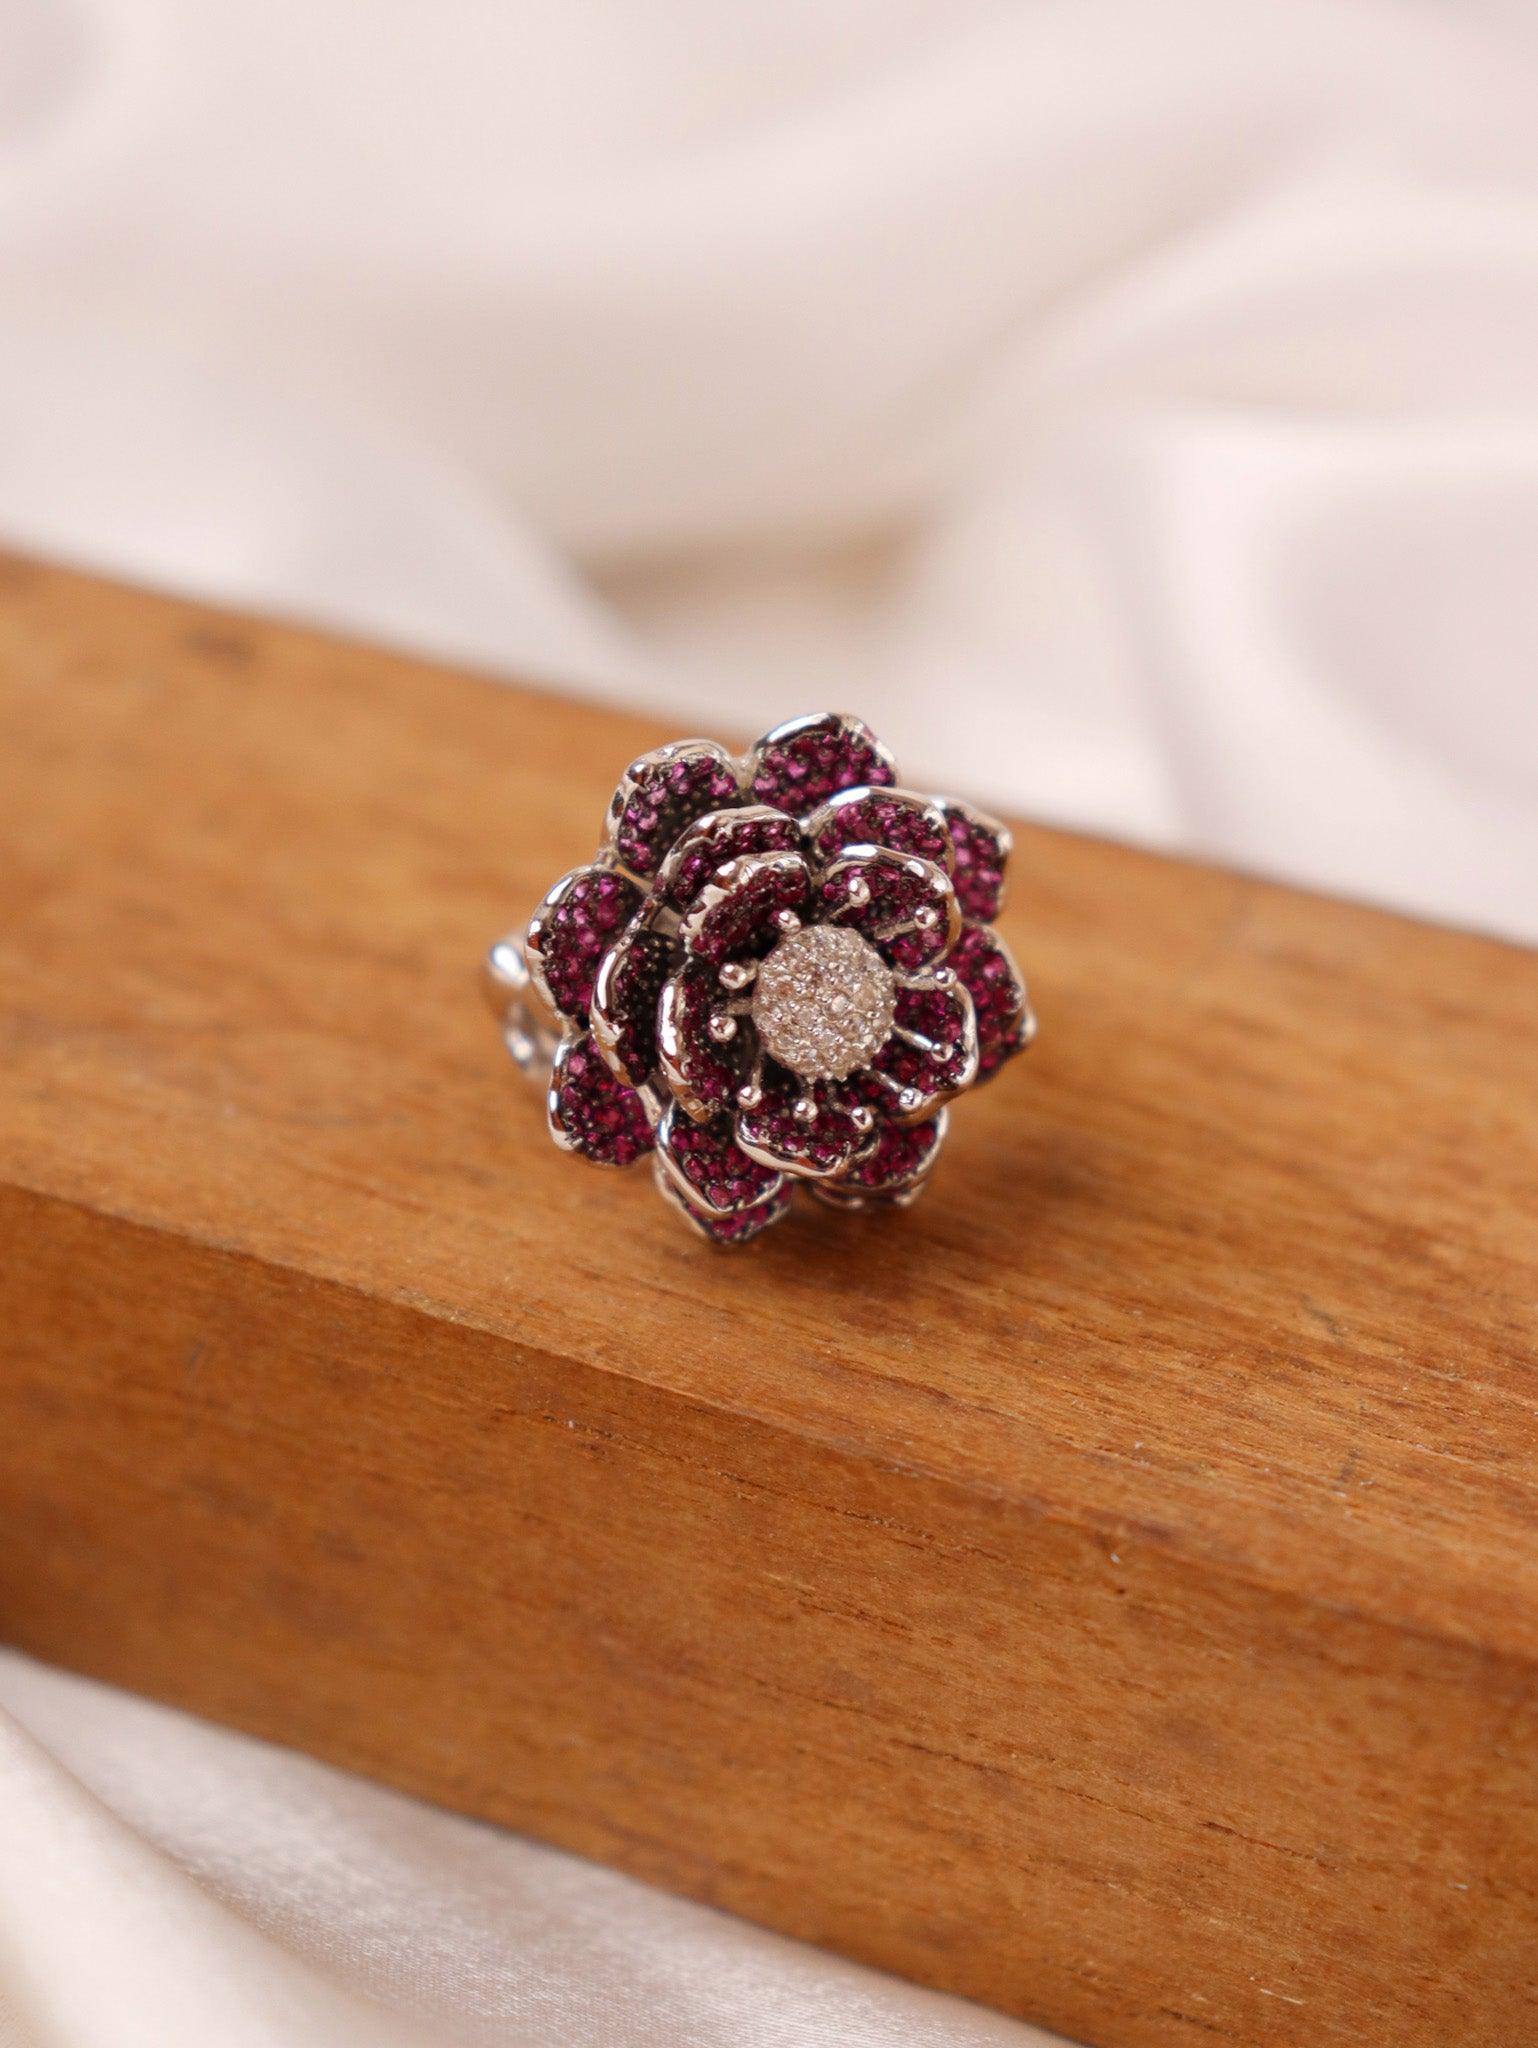 The Dahlia Pure Silver Ring Embellished With Cubic Zirconia Stones - Curio Cottage 